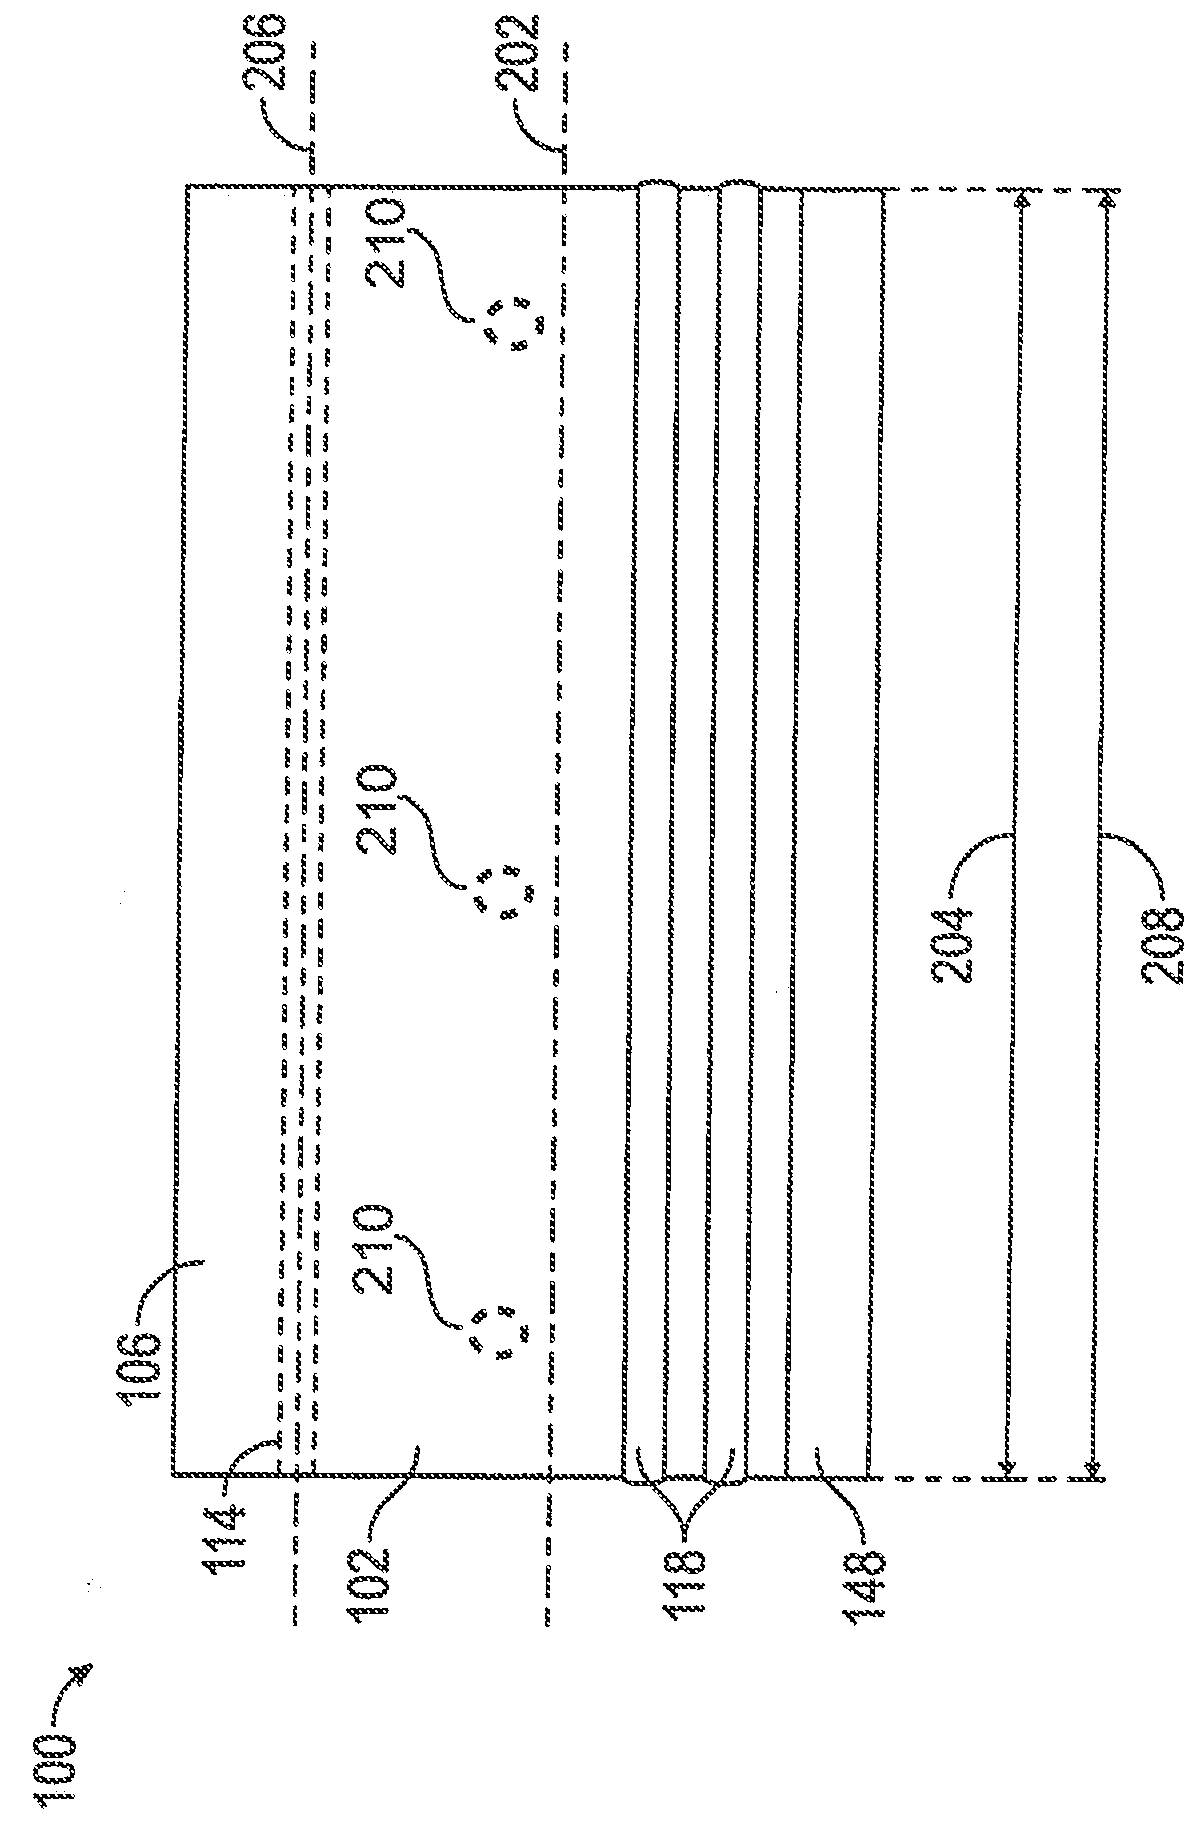 Expansion Joint Seal with surface load transfer, intumescent, and internal sensor